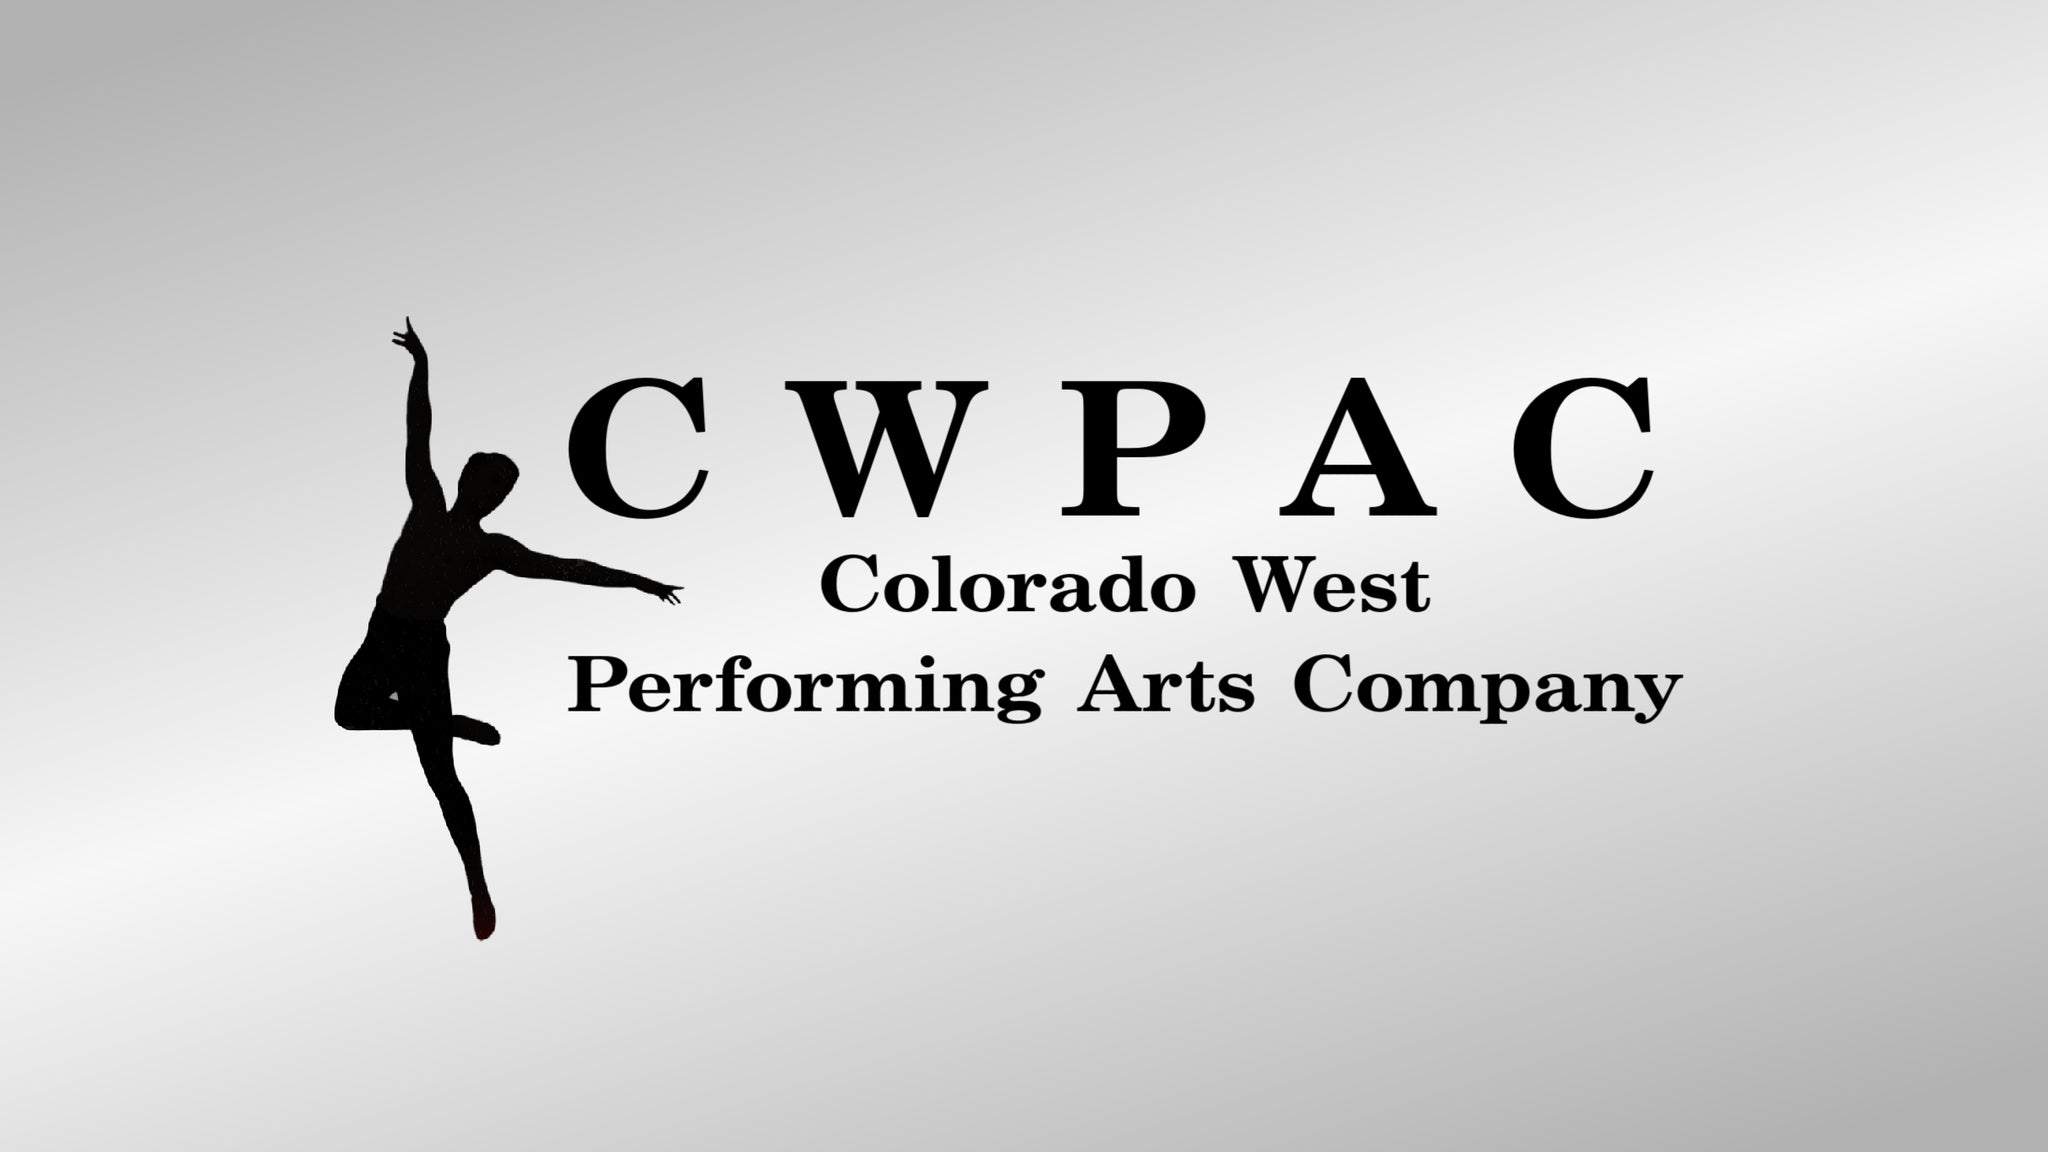 Cinderella - CWPAC at Avalon Theatre - Grand Junction, CO 81501